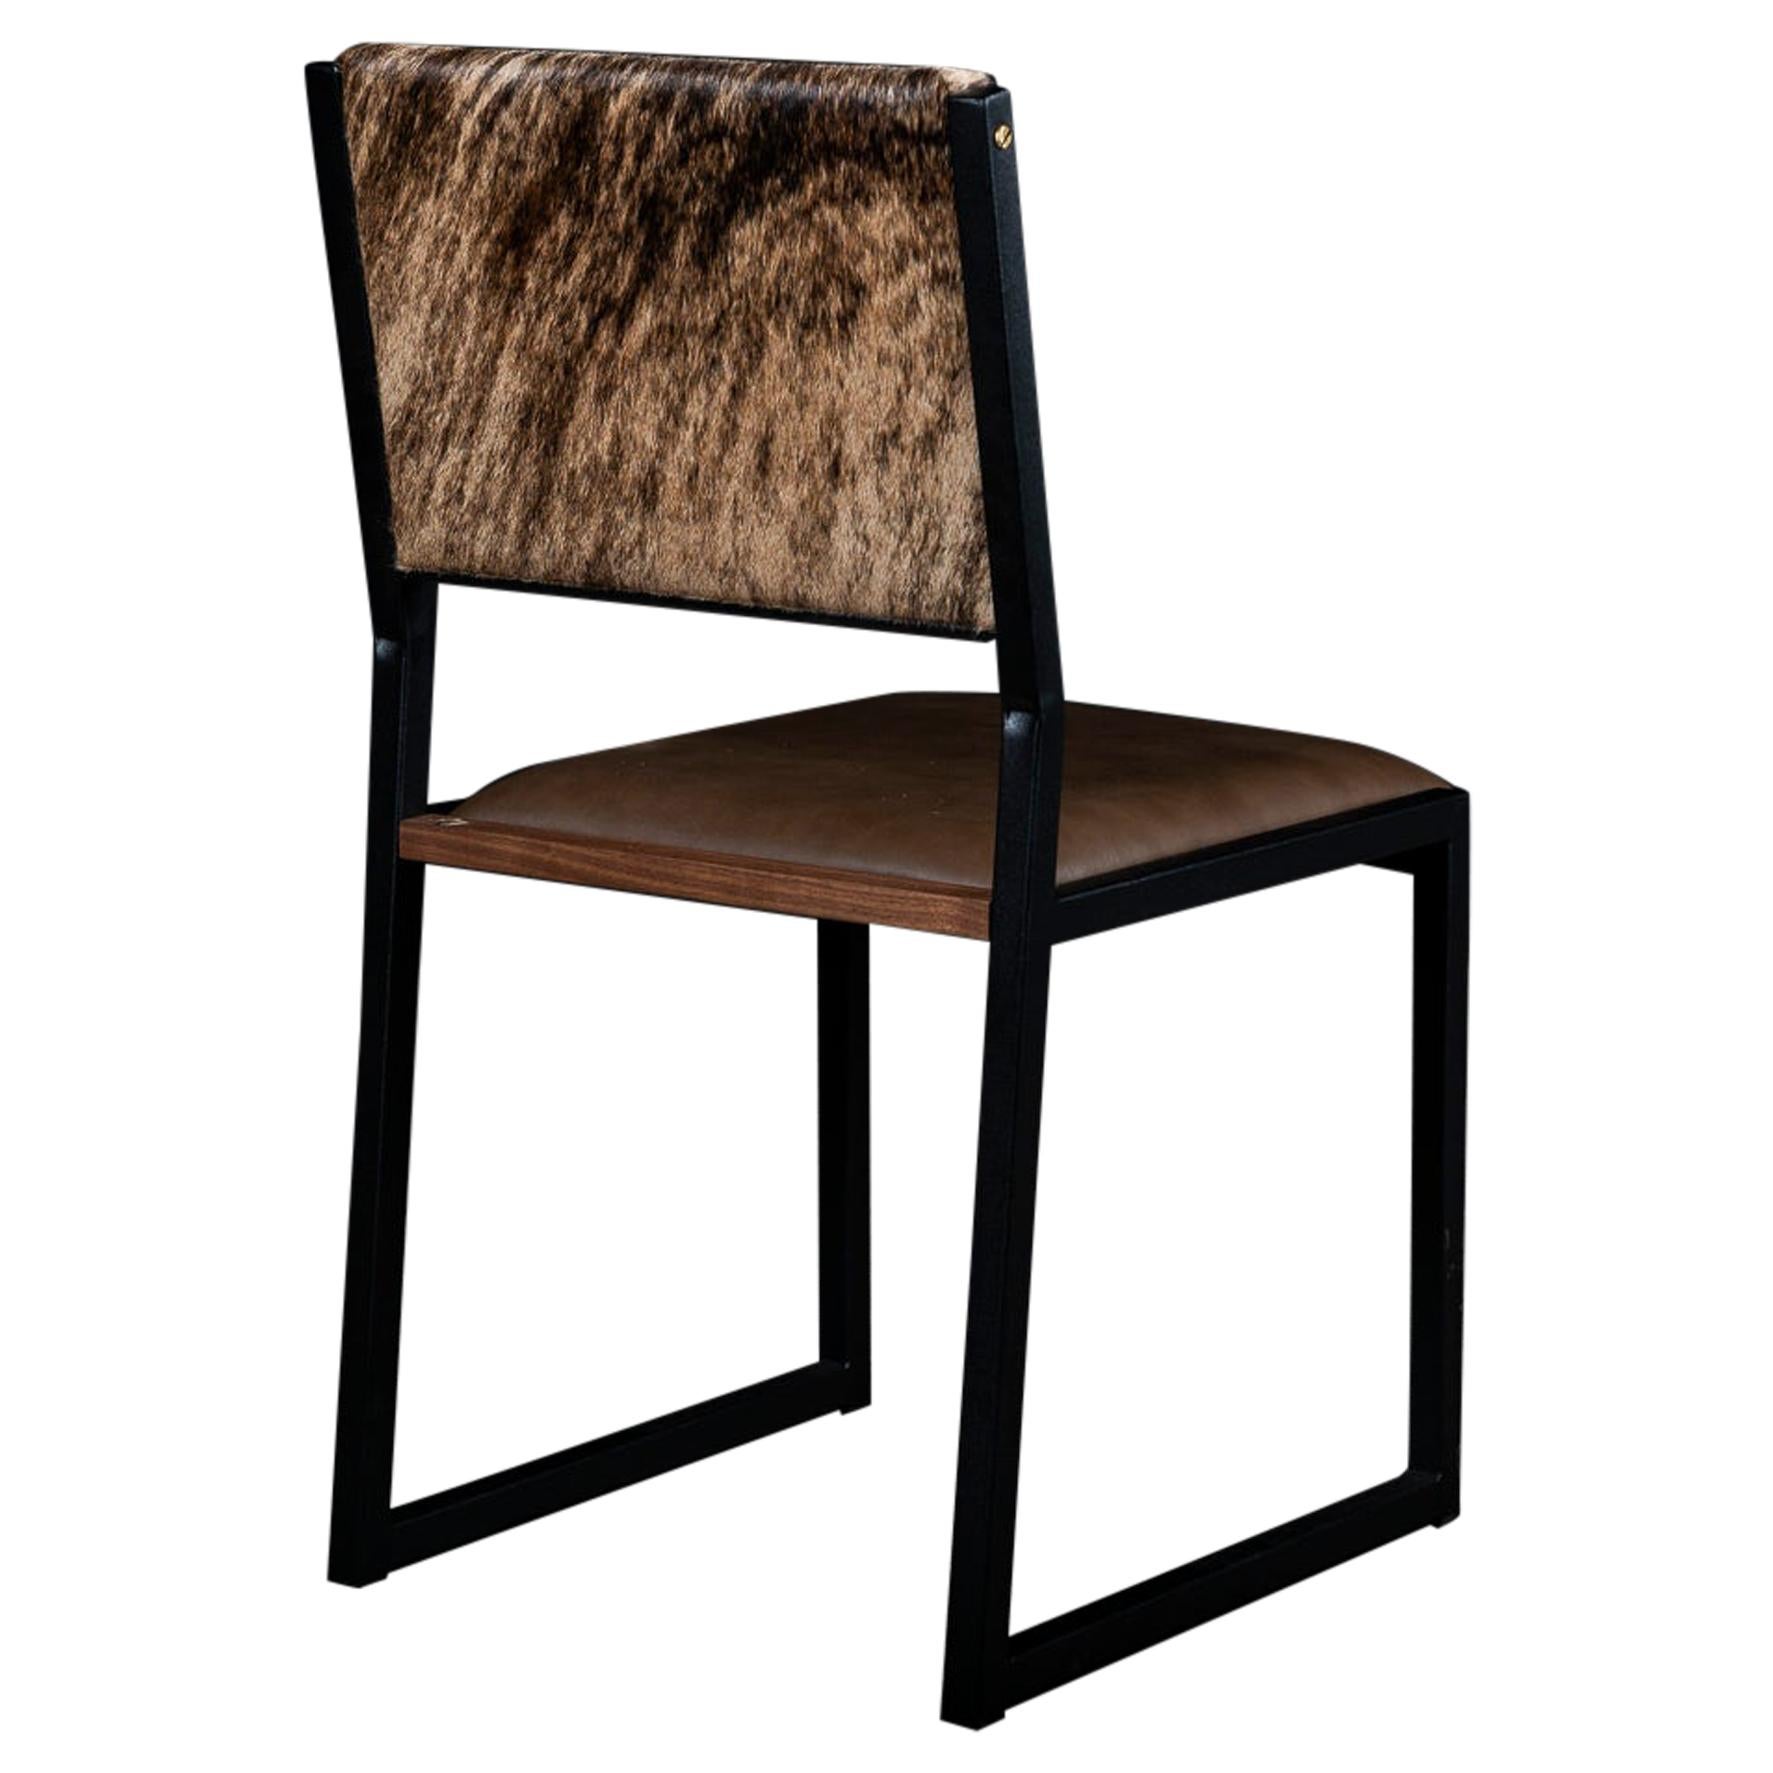 Shaker Modern Chair by Ambrozia, Walnut, Brown Leather, light brown brindle hide For Sale